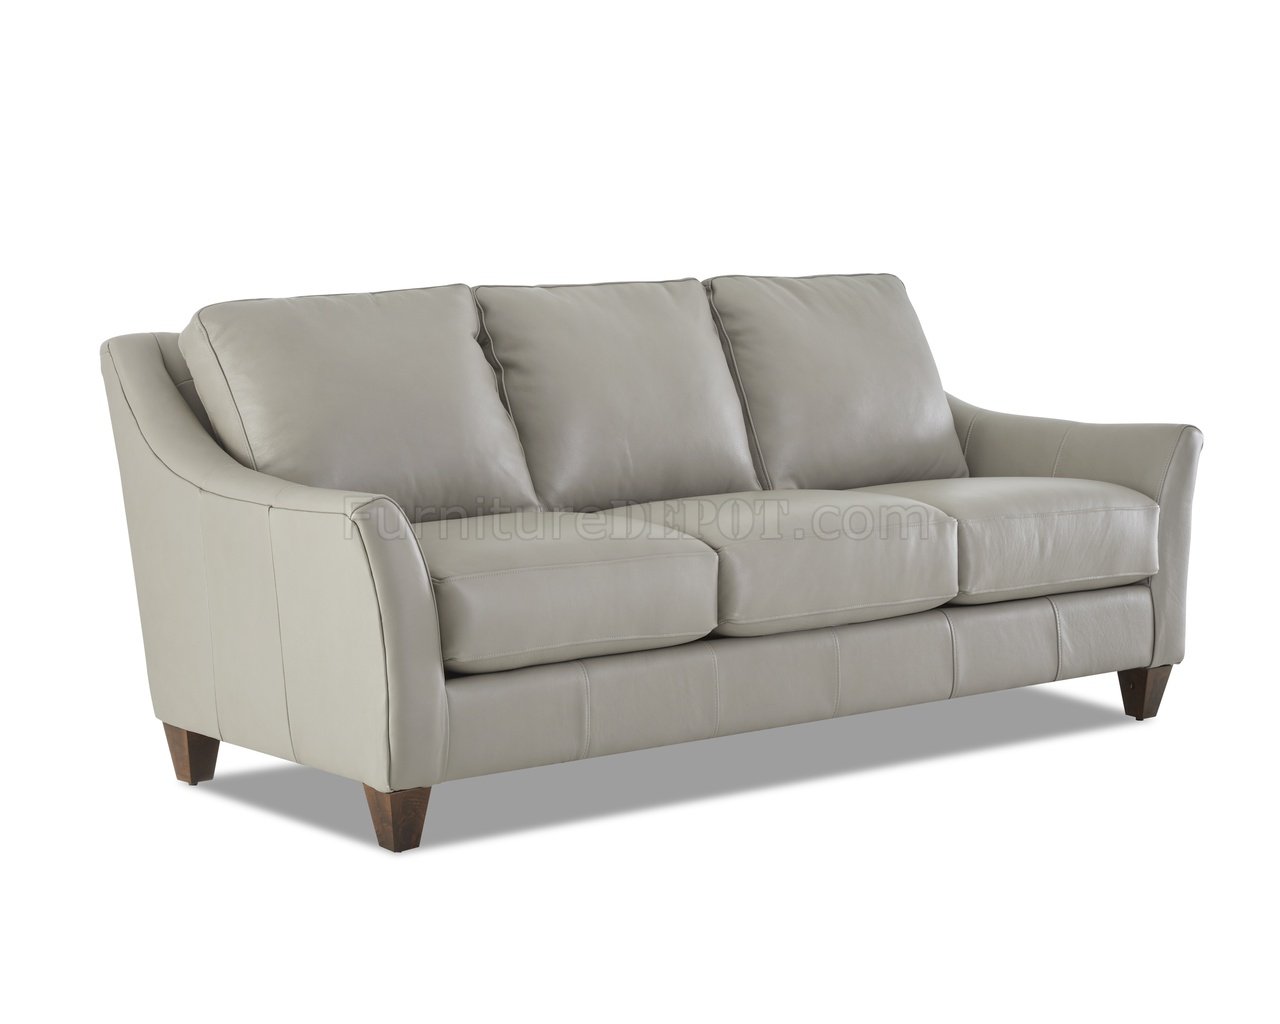 Joanna Sofa in Light Gray Leather by Klaussner w/Options